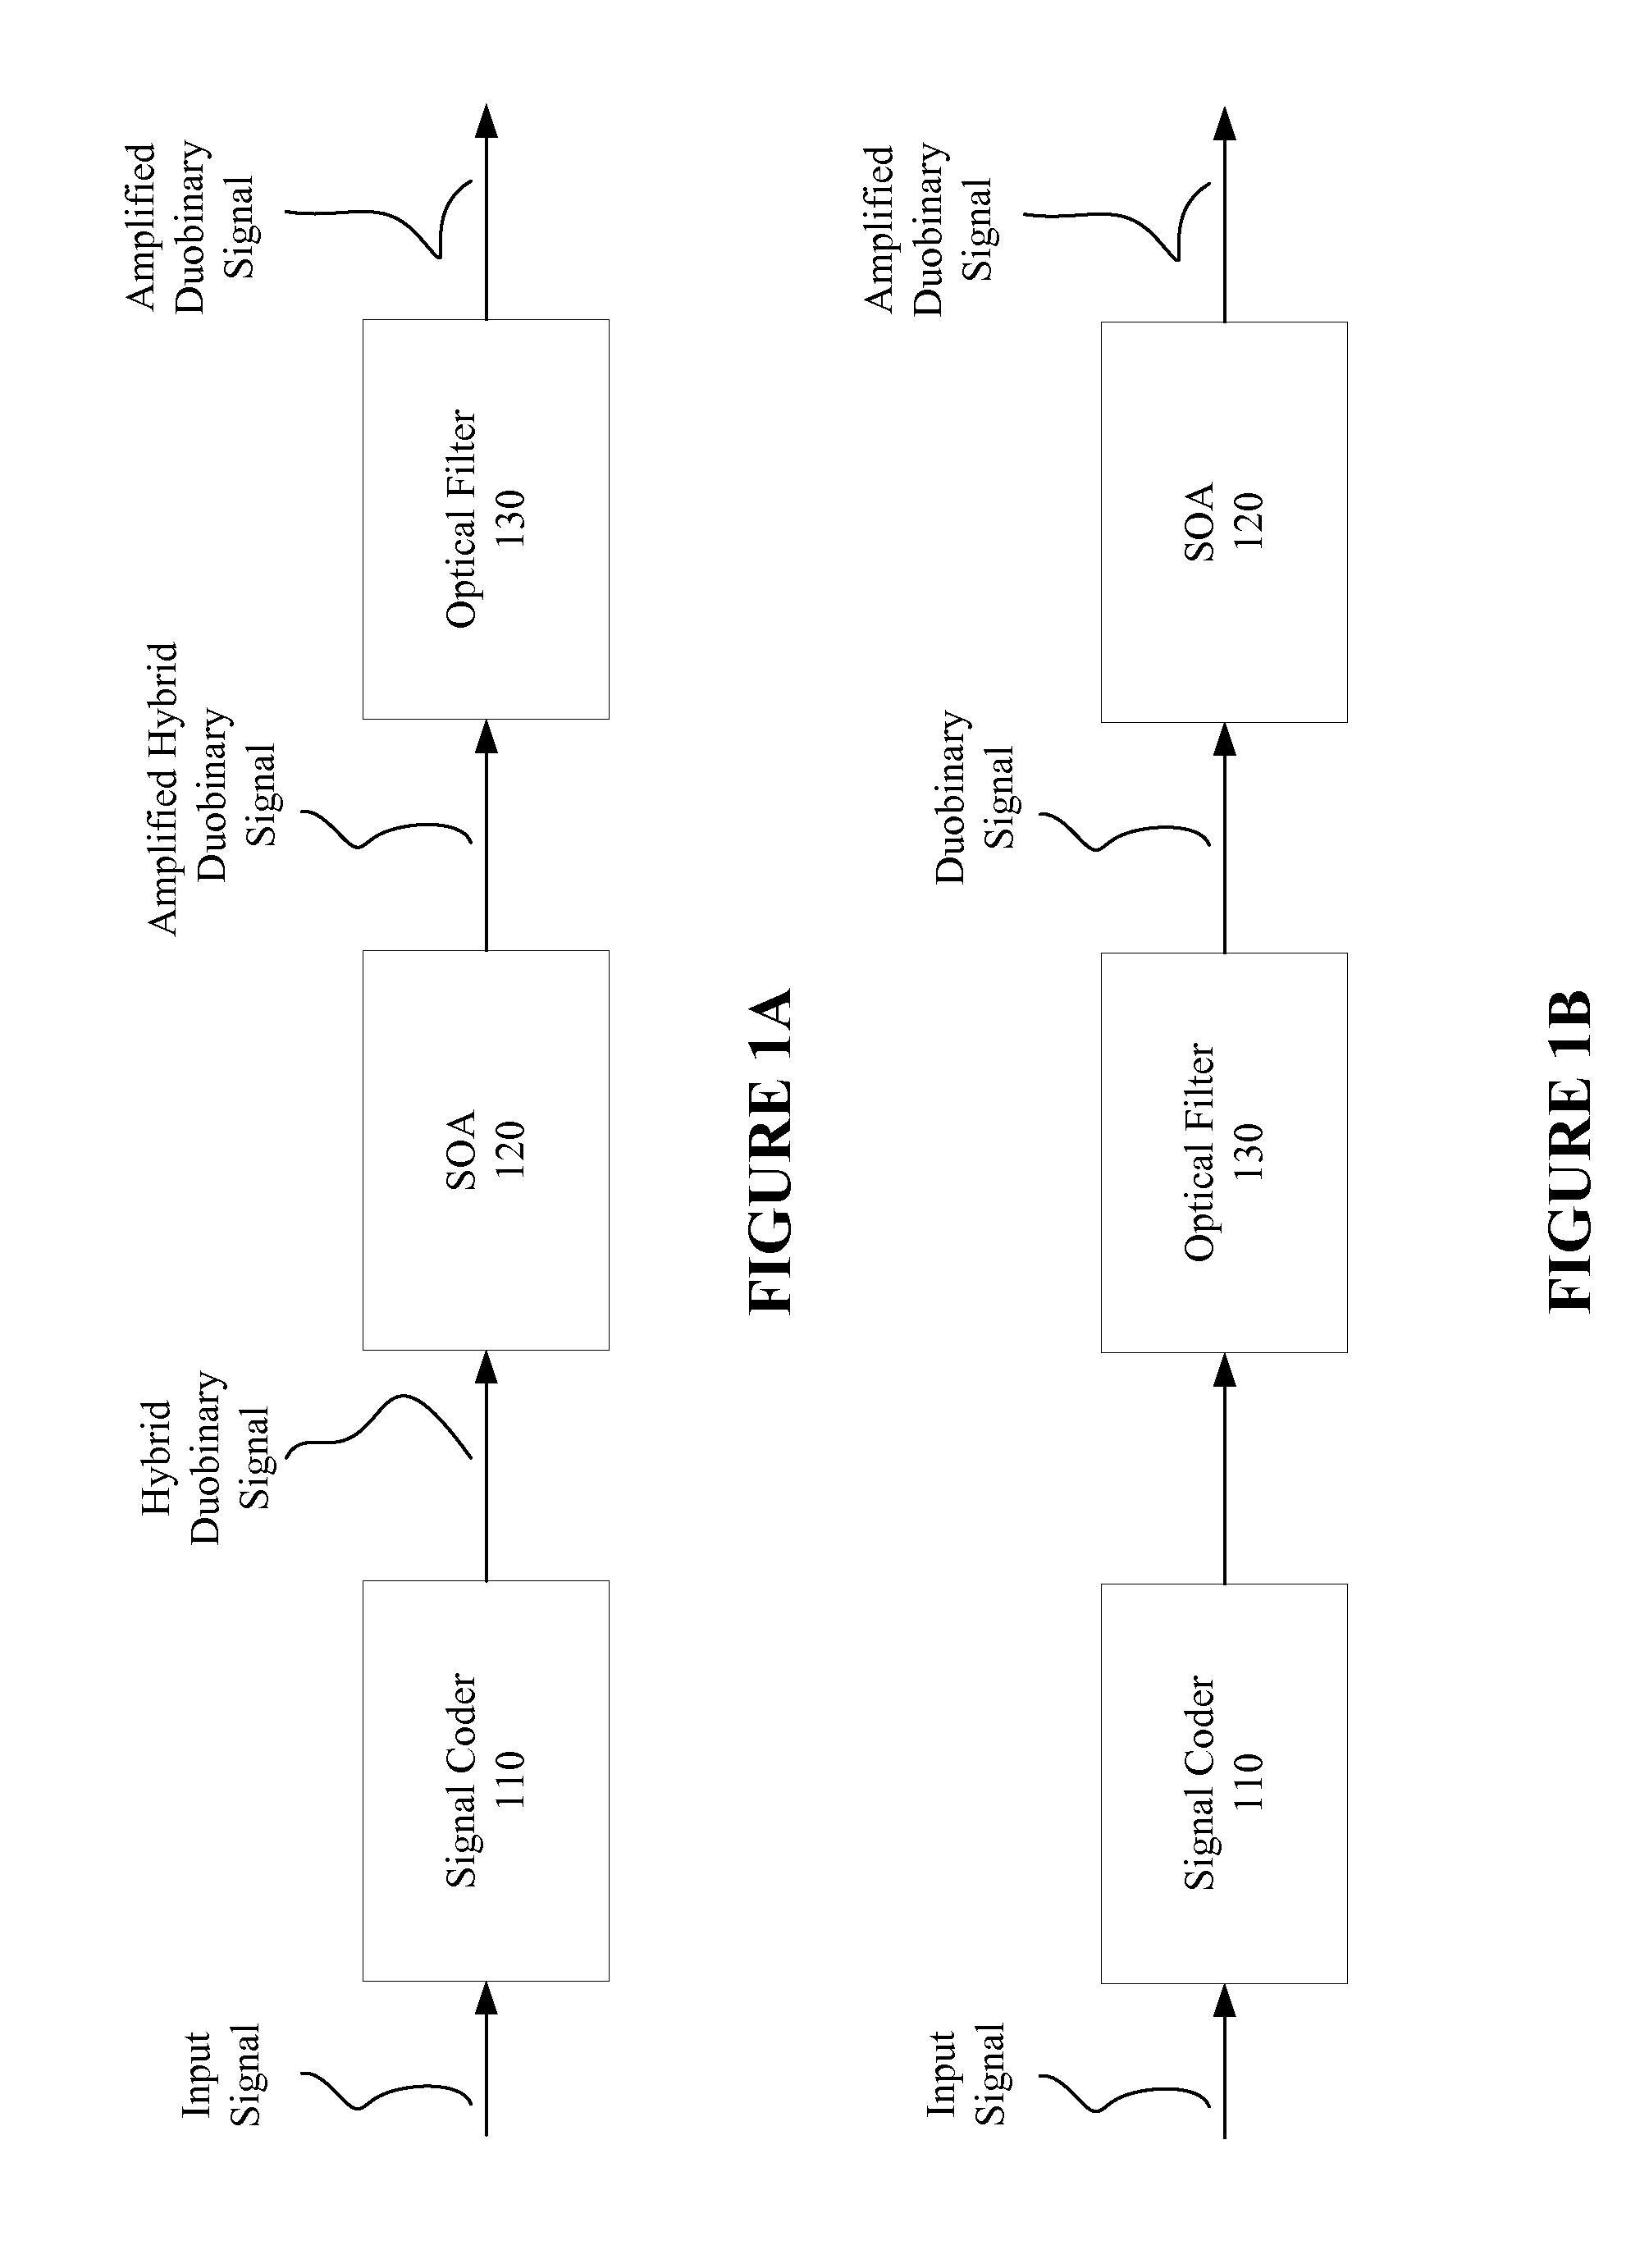 Optical Shaping for Amplification in a Semiconductor Optical Amplifier